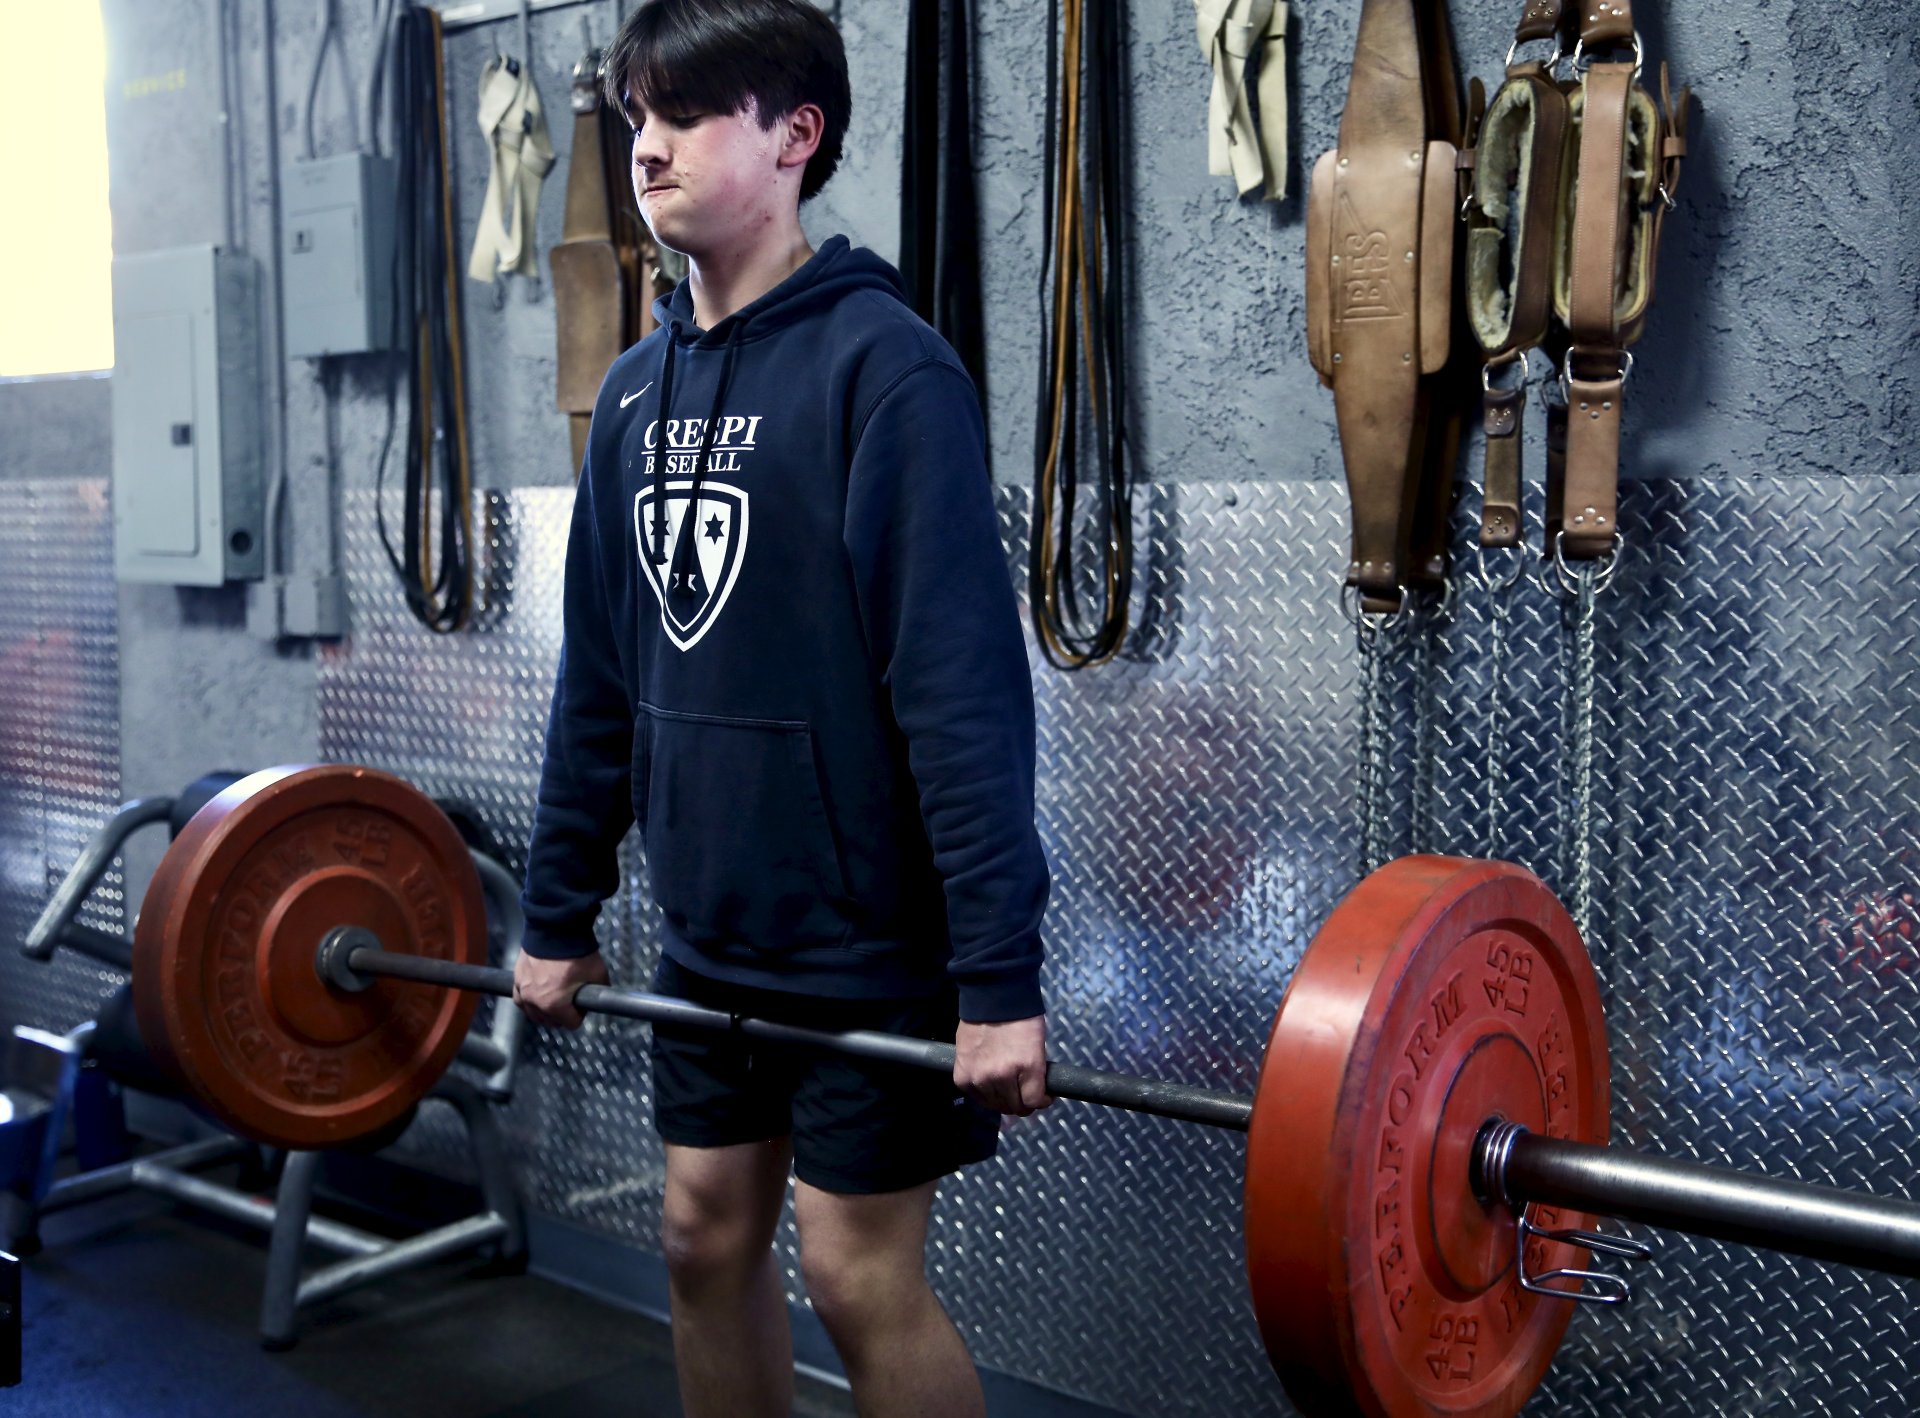 Becoming technically proficient in all lifts is the first priority before making increases in resistance.